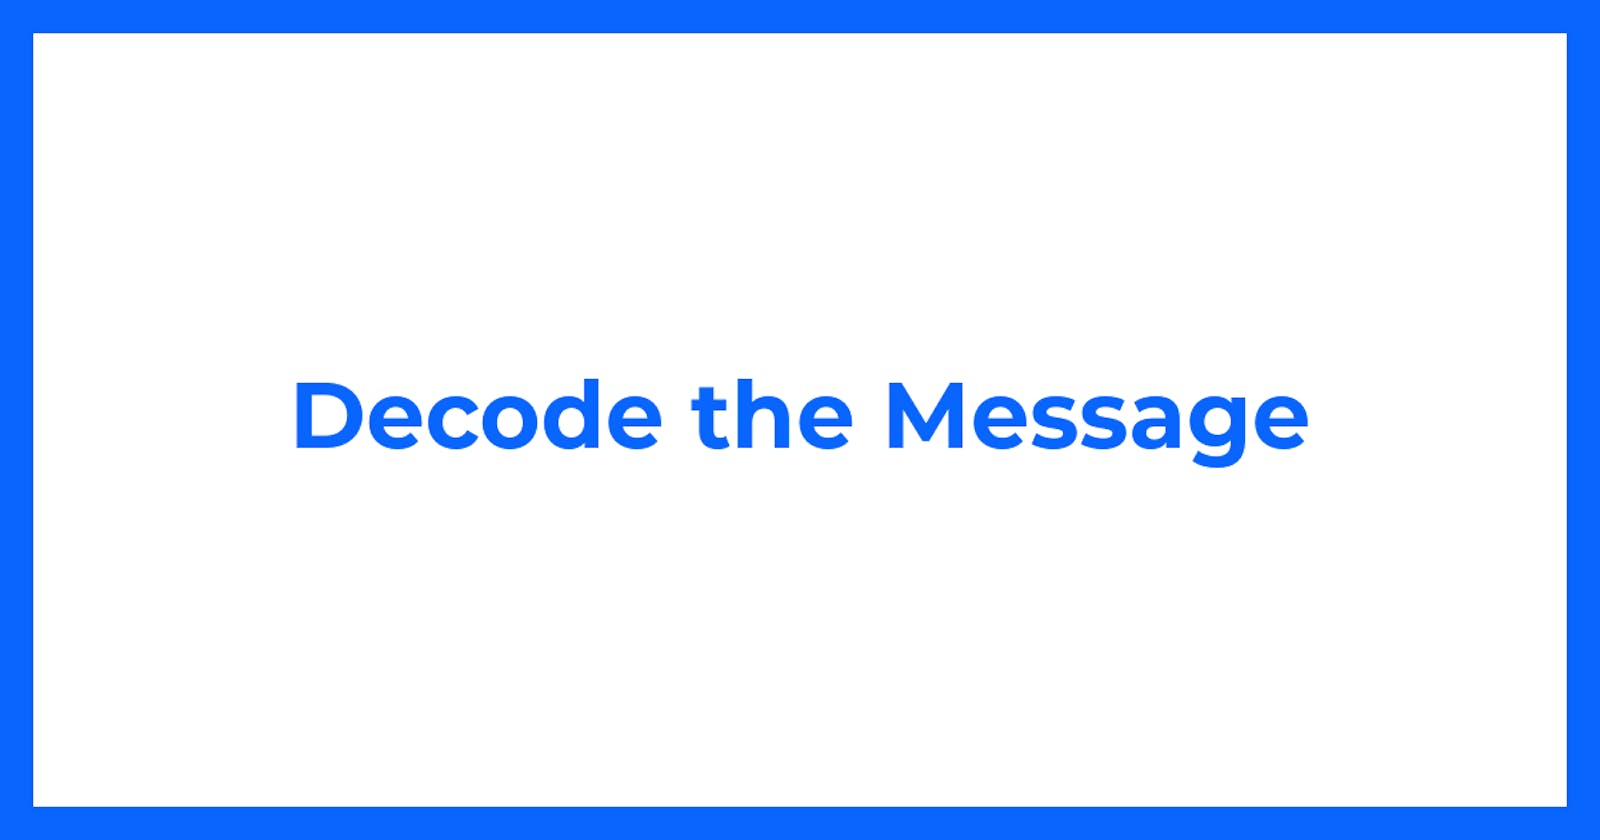 Decode the Message